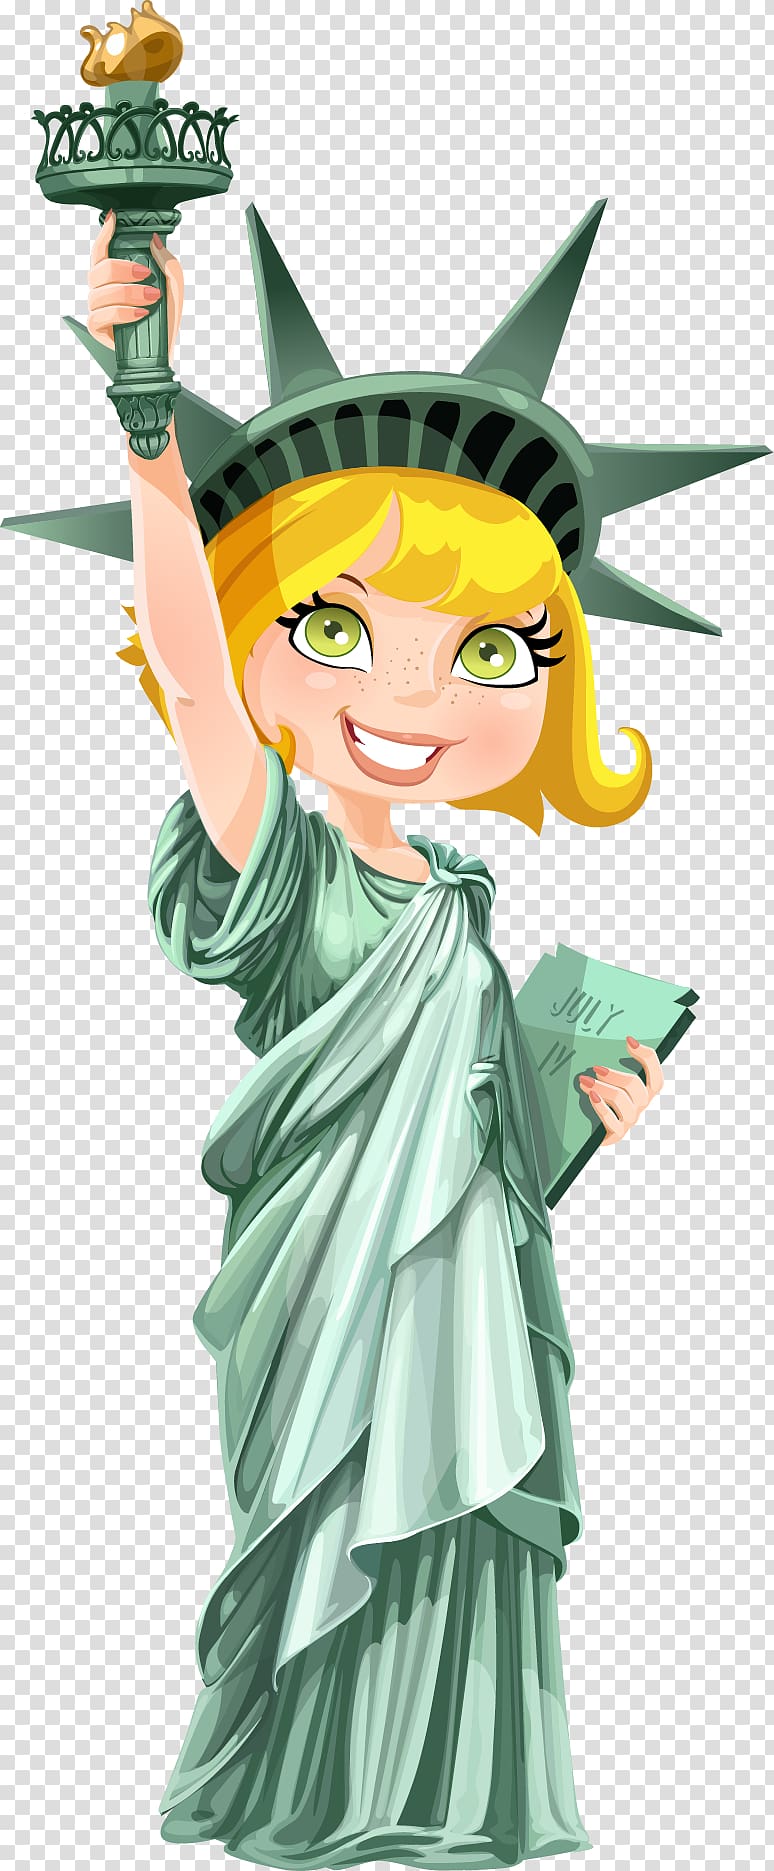 Statue of Liberty Illustration, hand-painted free goddess transparent background PNG clipart